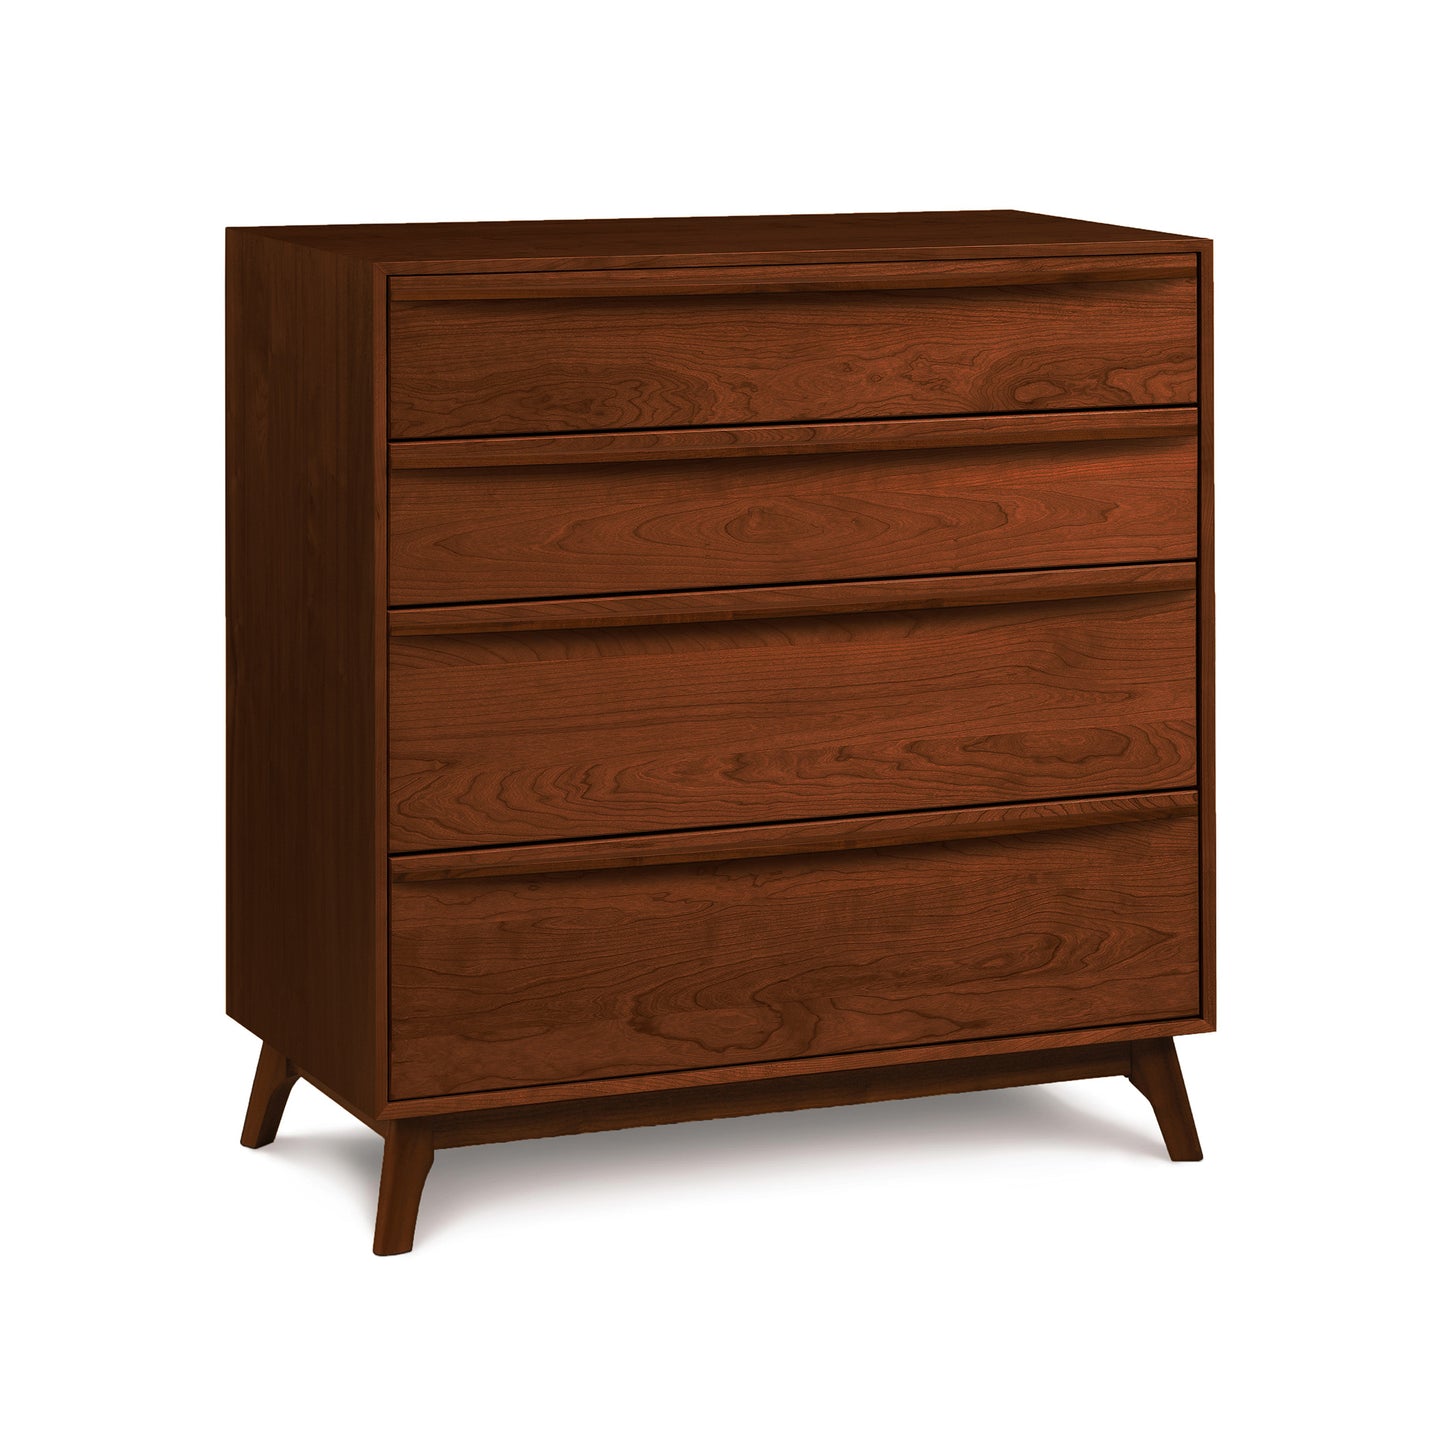 A Copeland Furniture Catalina 4-Drawer Chest made of sustainable harvested woods, positioned against a white background.